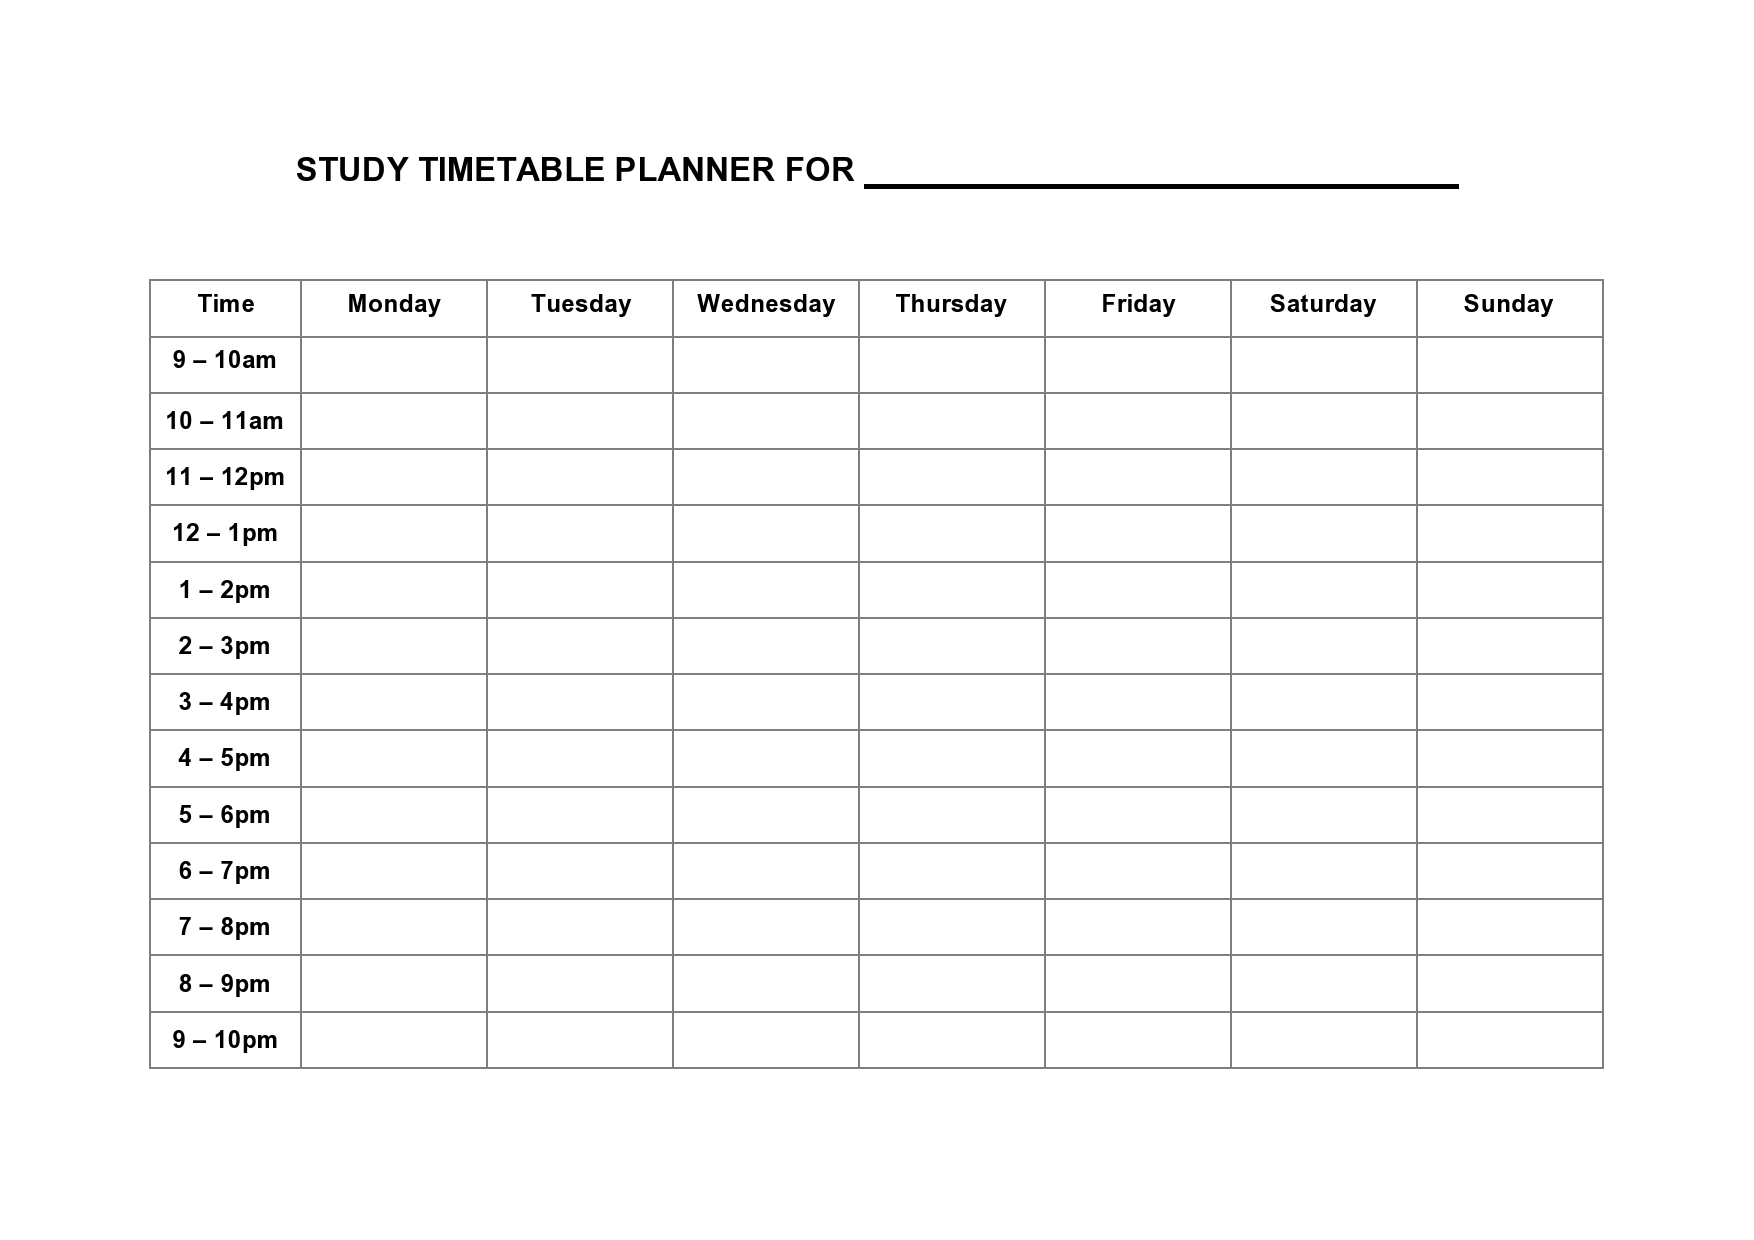 Detail Study Schedule Template Nomer 4